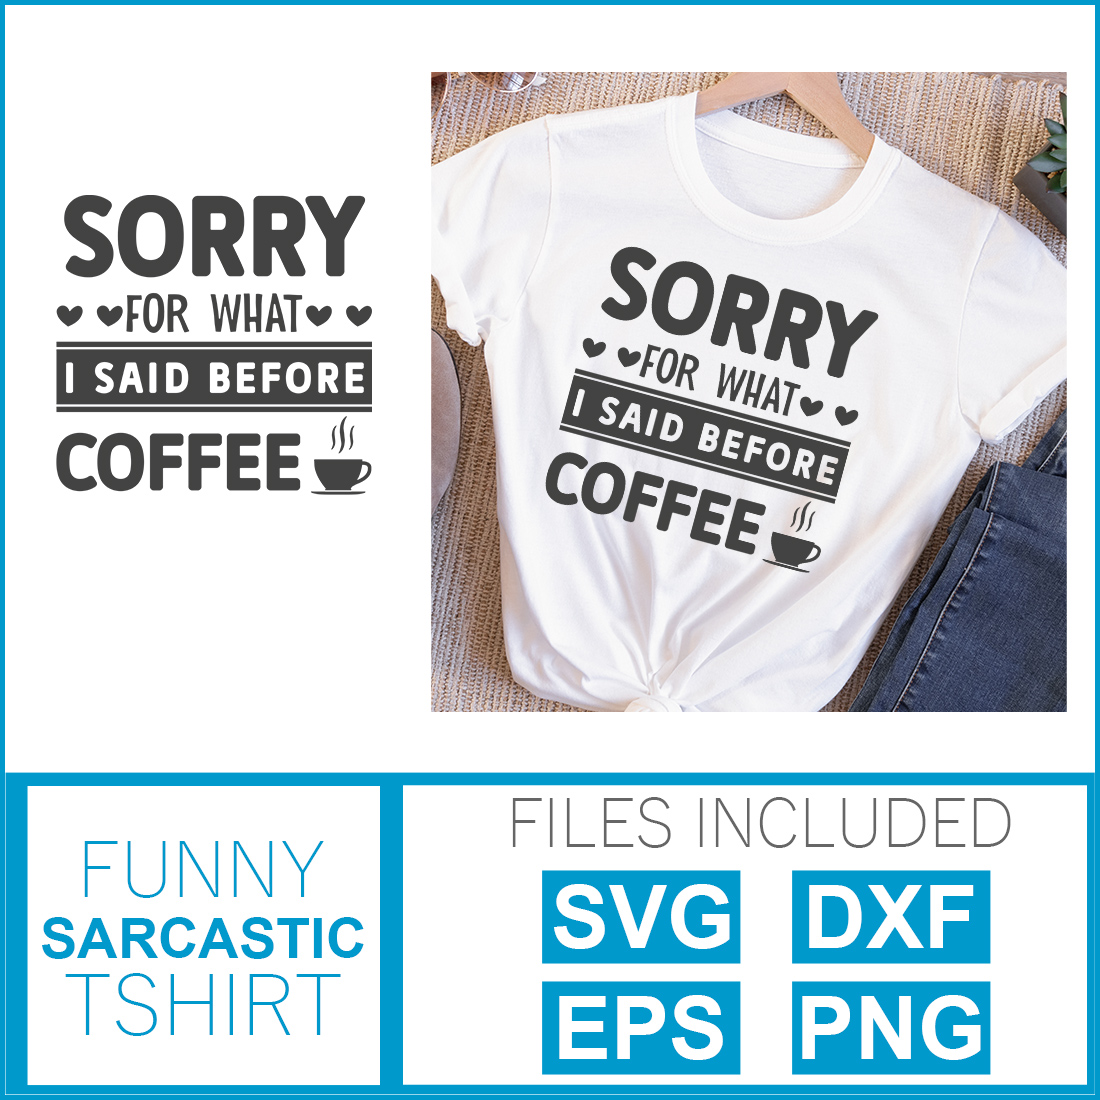 Image of a white t-shirt with a charming slogan "sorry for what i said before coffee".